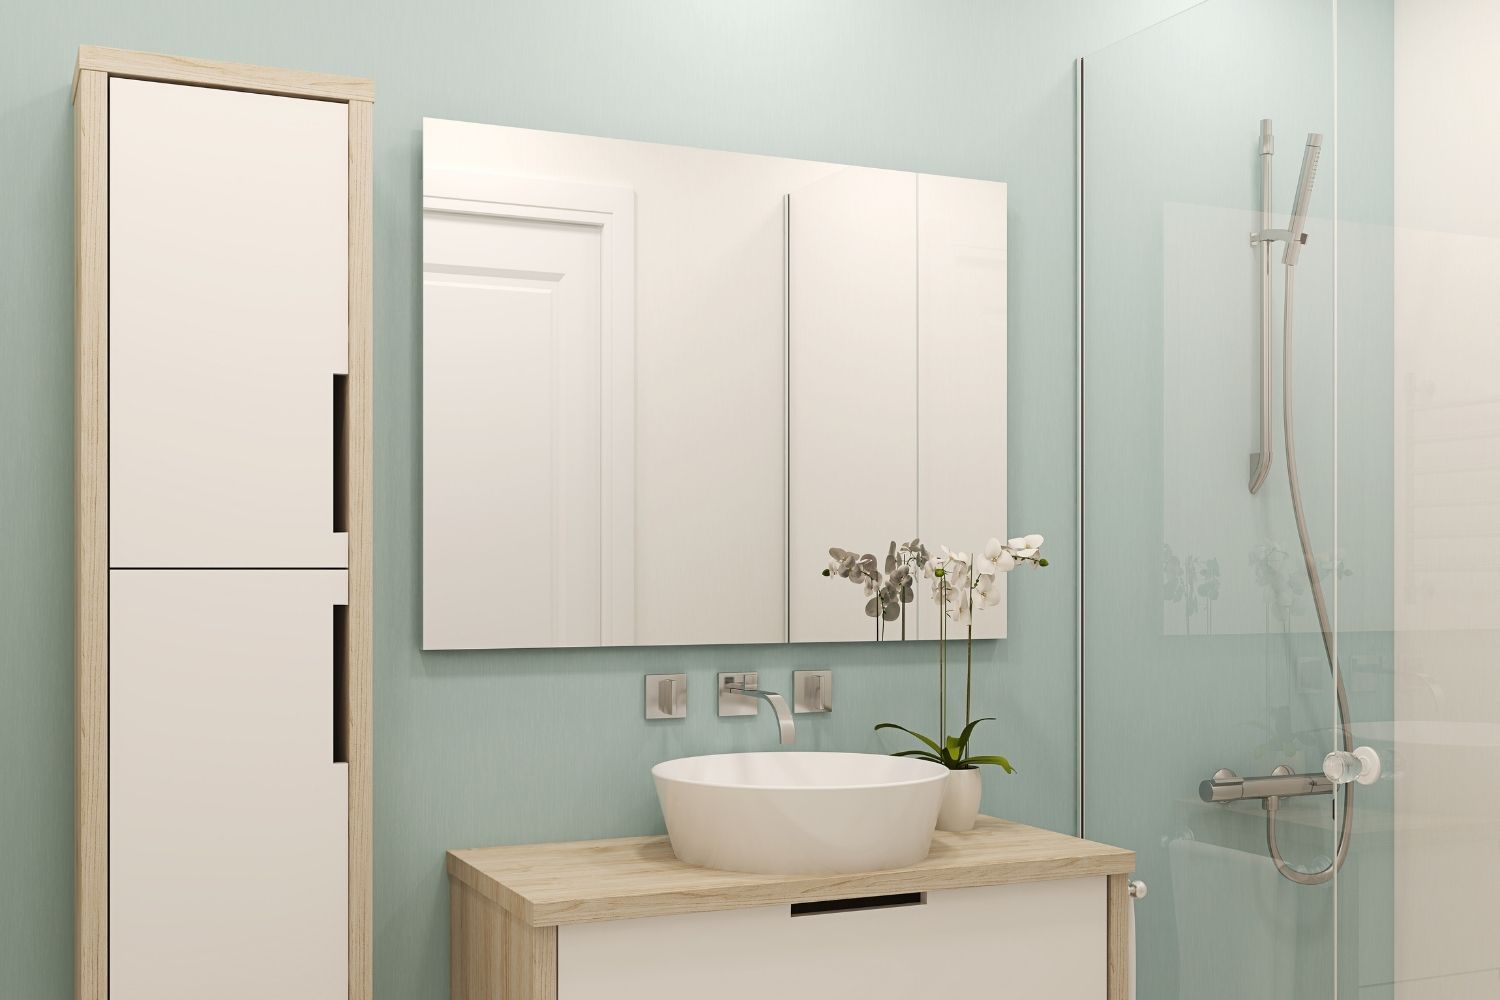 13 Of The Best Paint Colors For Small, How To Choose Paint Color For Small Bathroom